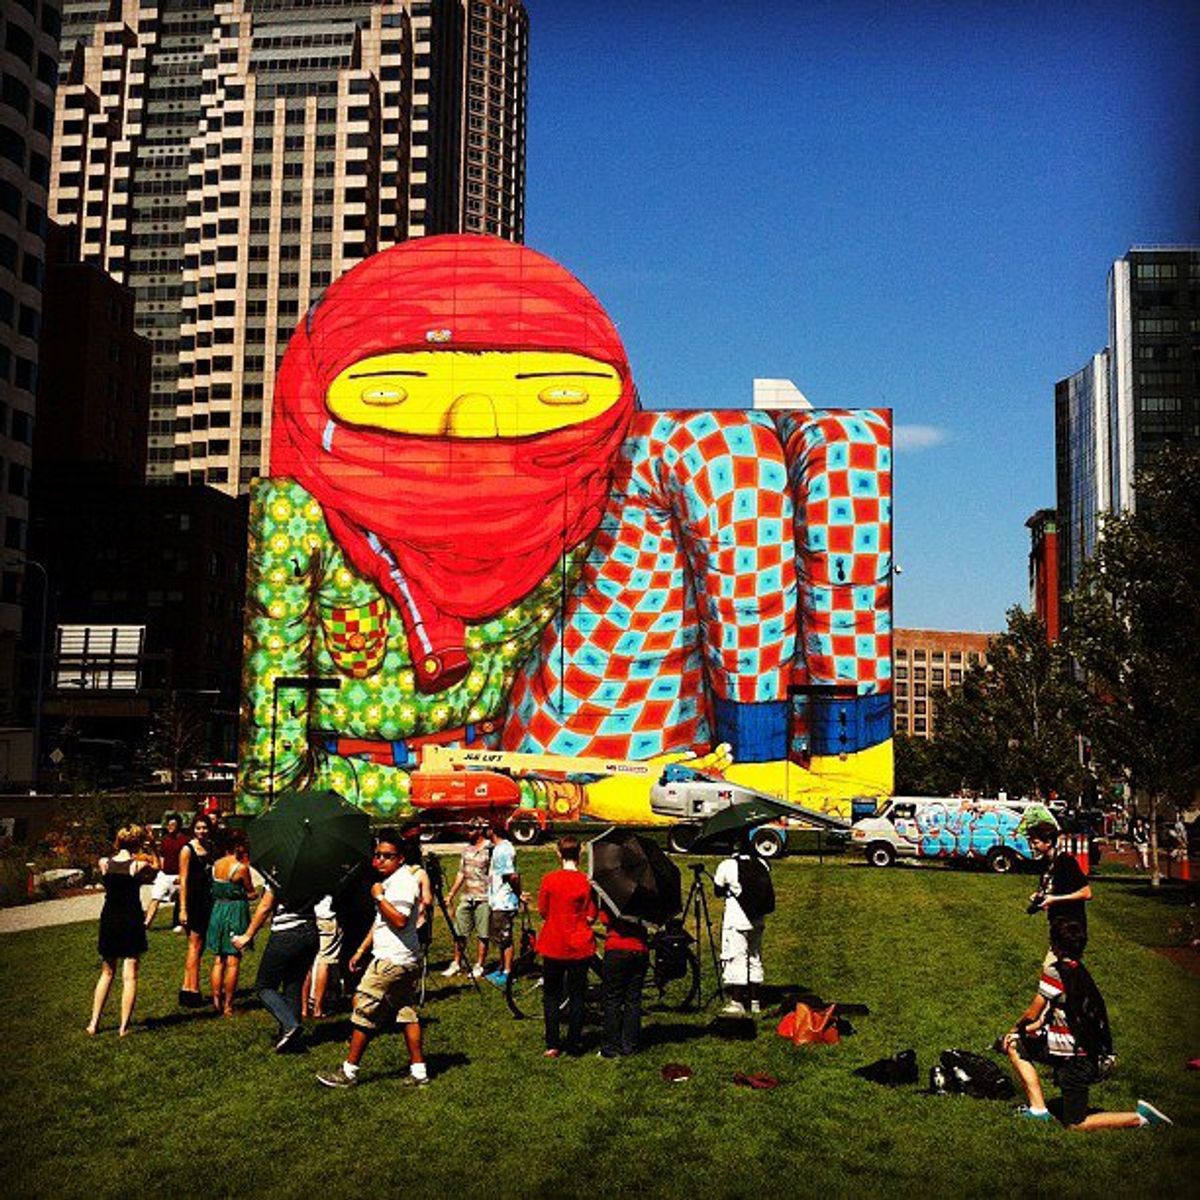 A new Os Gemeos painting rises on Boston’s Rose Fitzgerald Kennedy Greenway at Dewey Square to coincide with their show at the city’s Institute for Contemporary Art (via Geoff Hargadon’s Instagram)